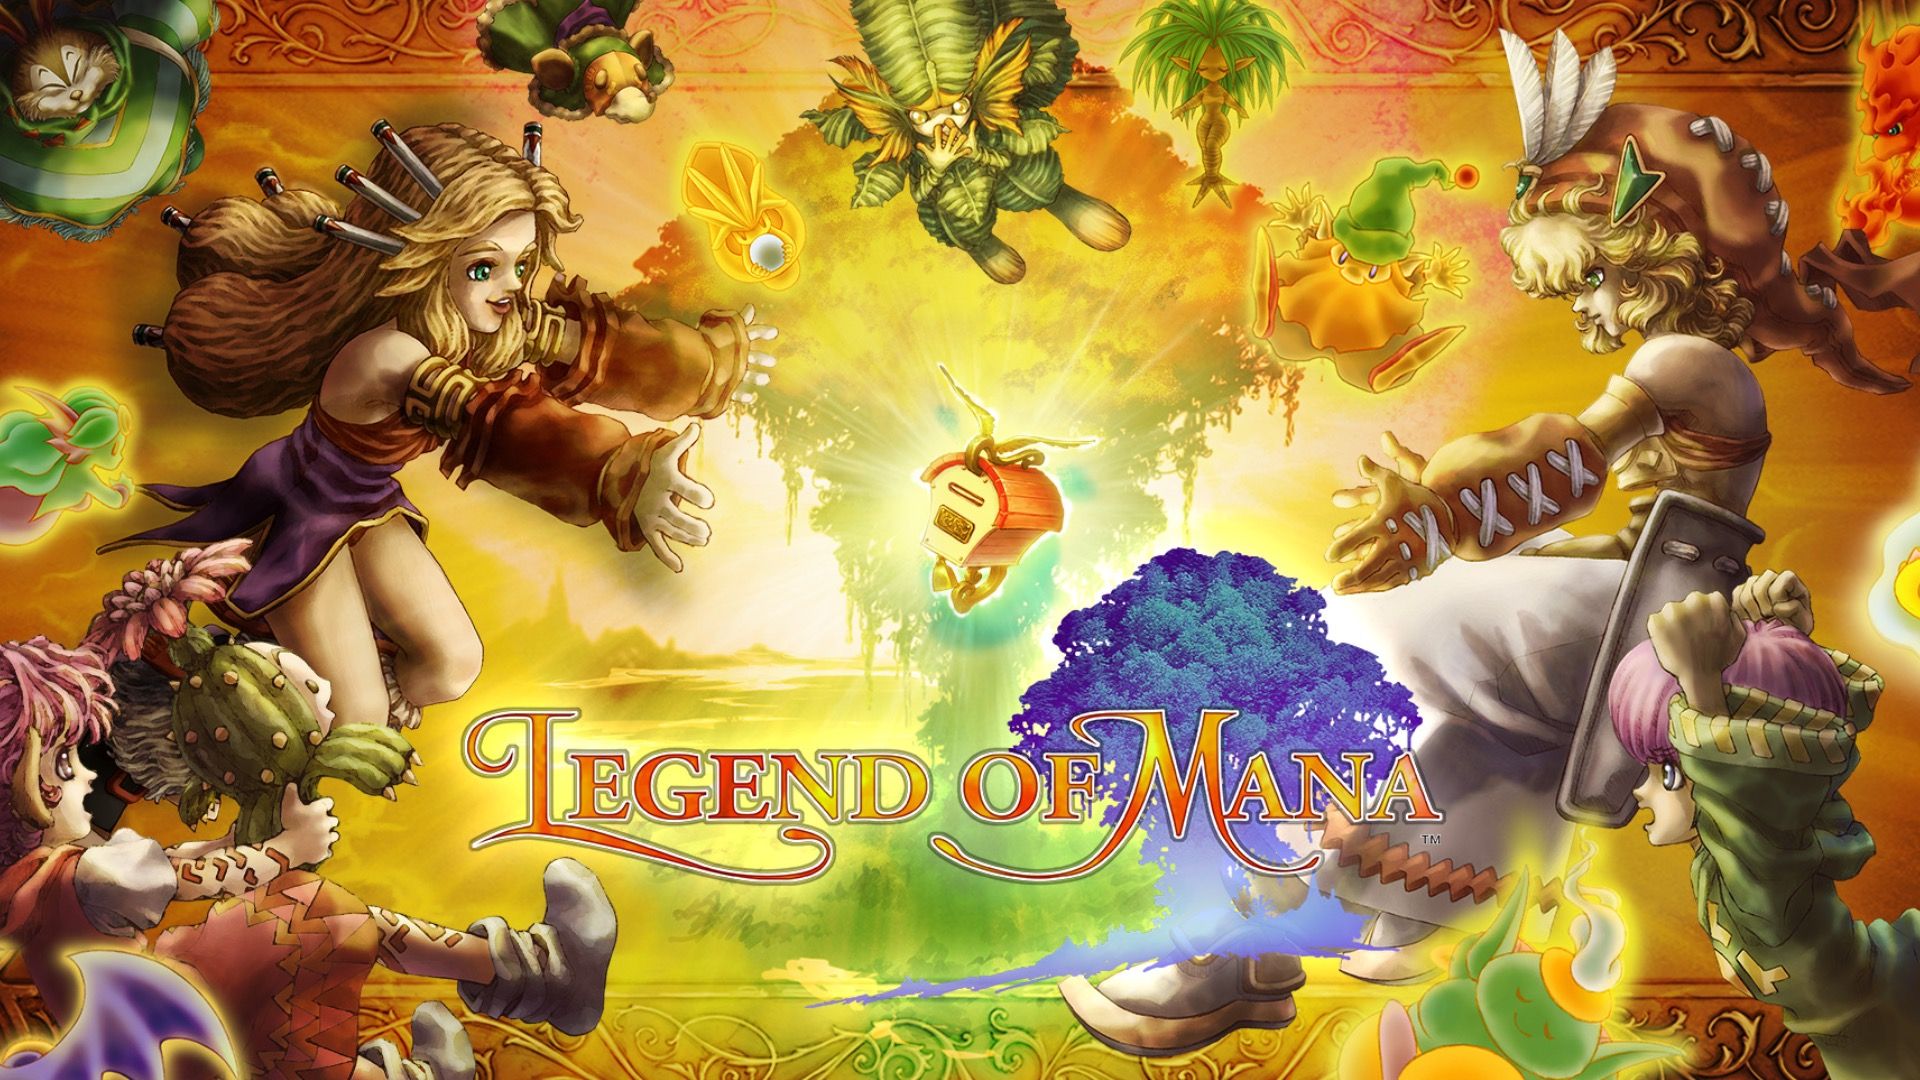 Legend of Mana Release Date Announced for PS Nintendo Switch, and Steam • The Mako Reactor